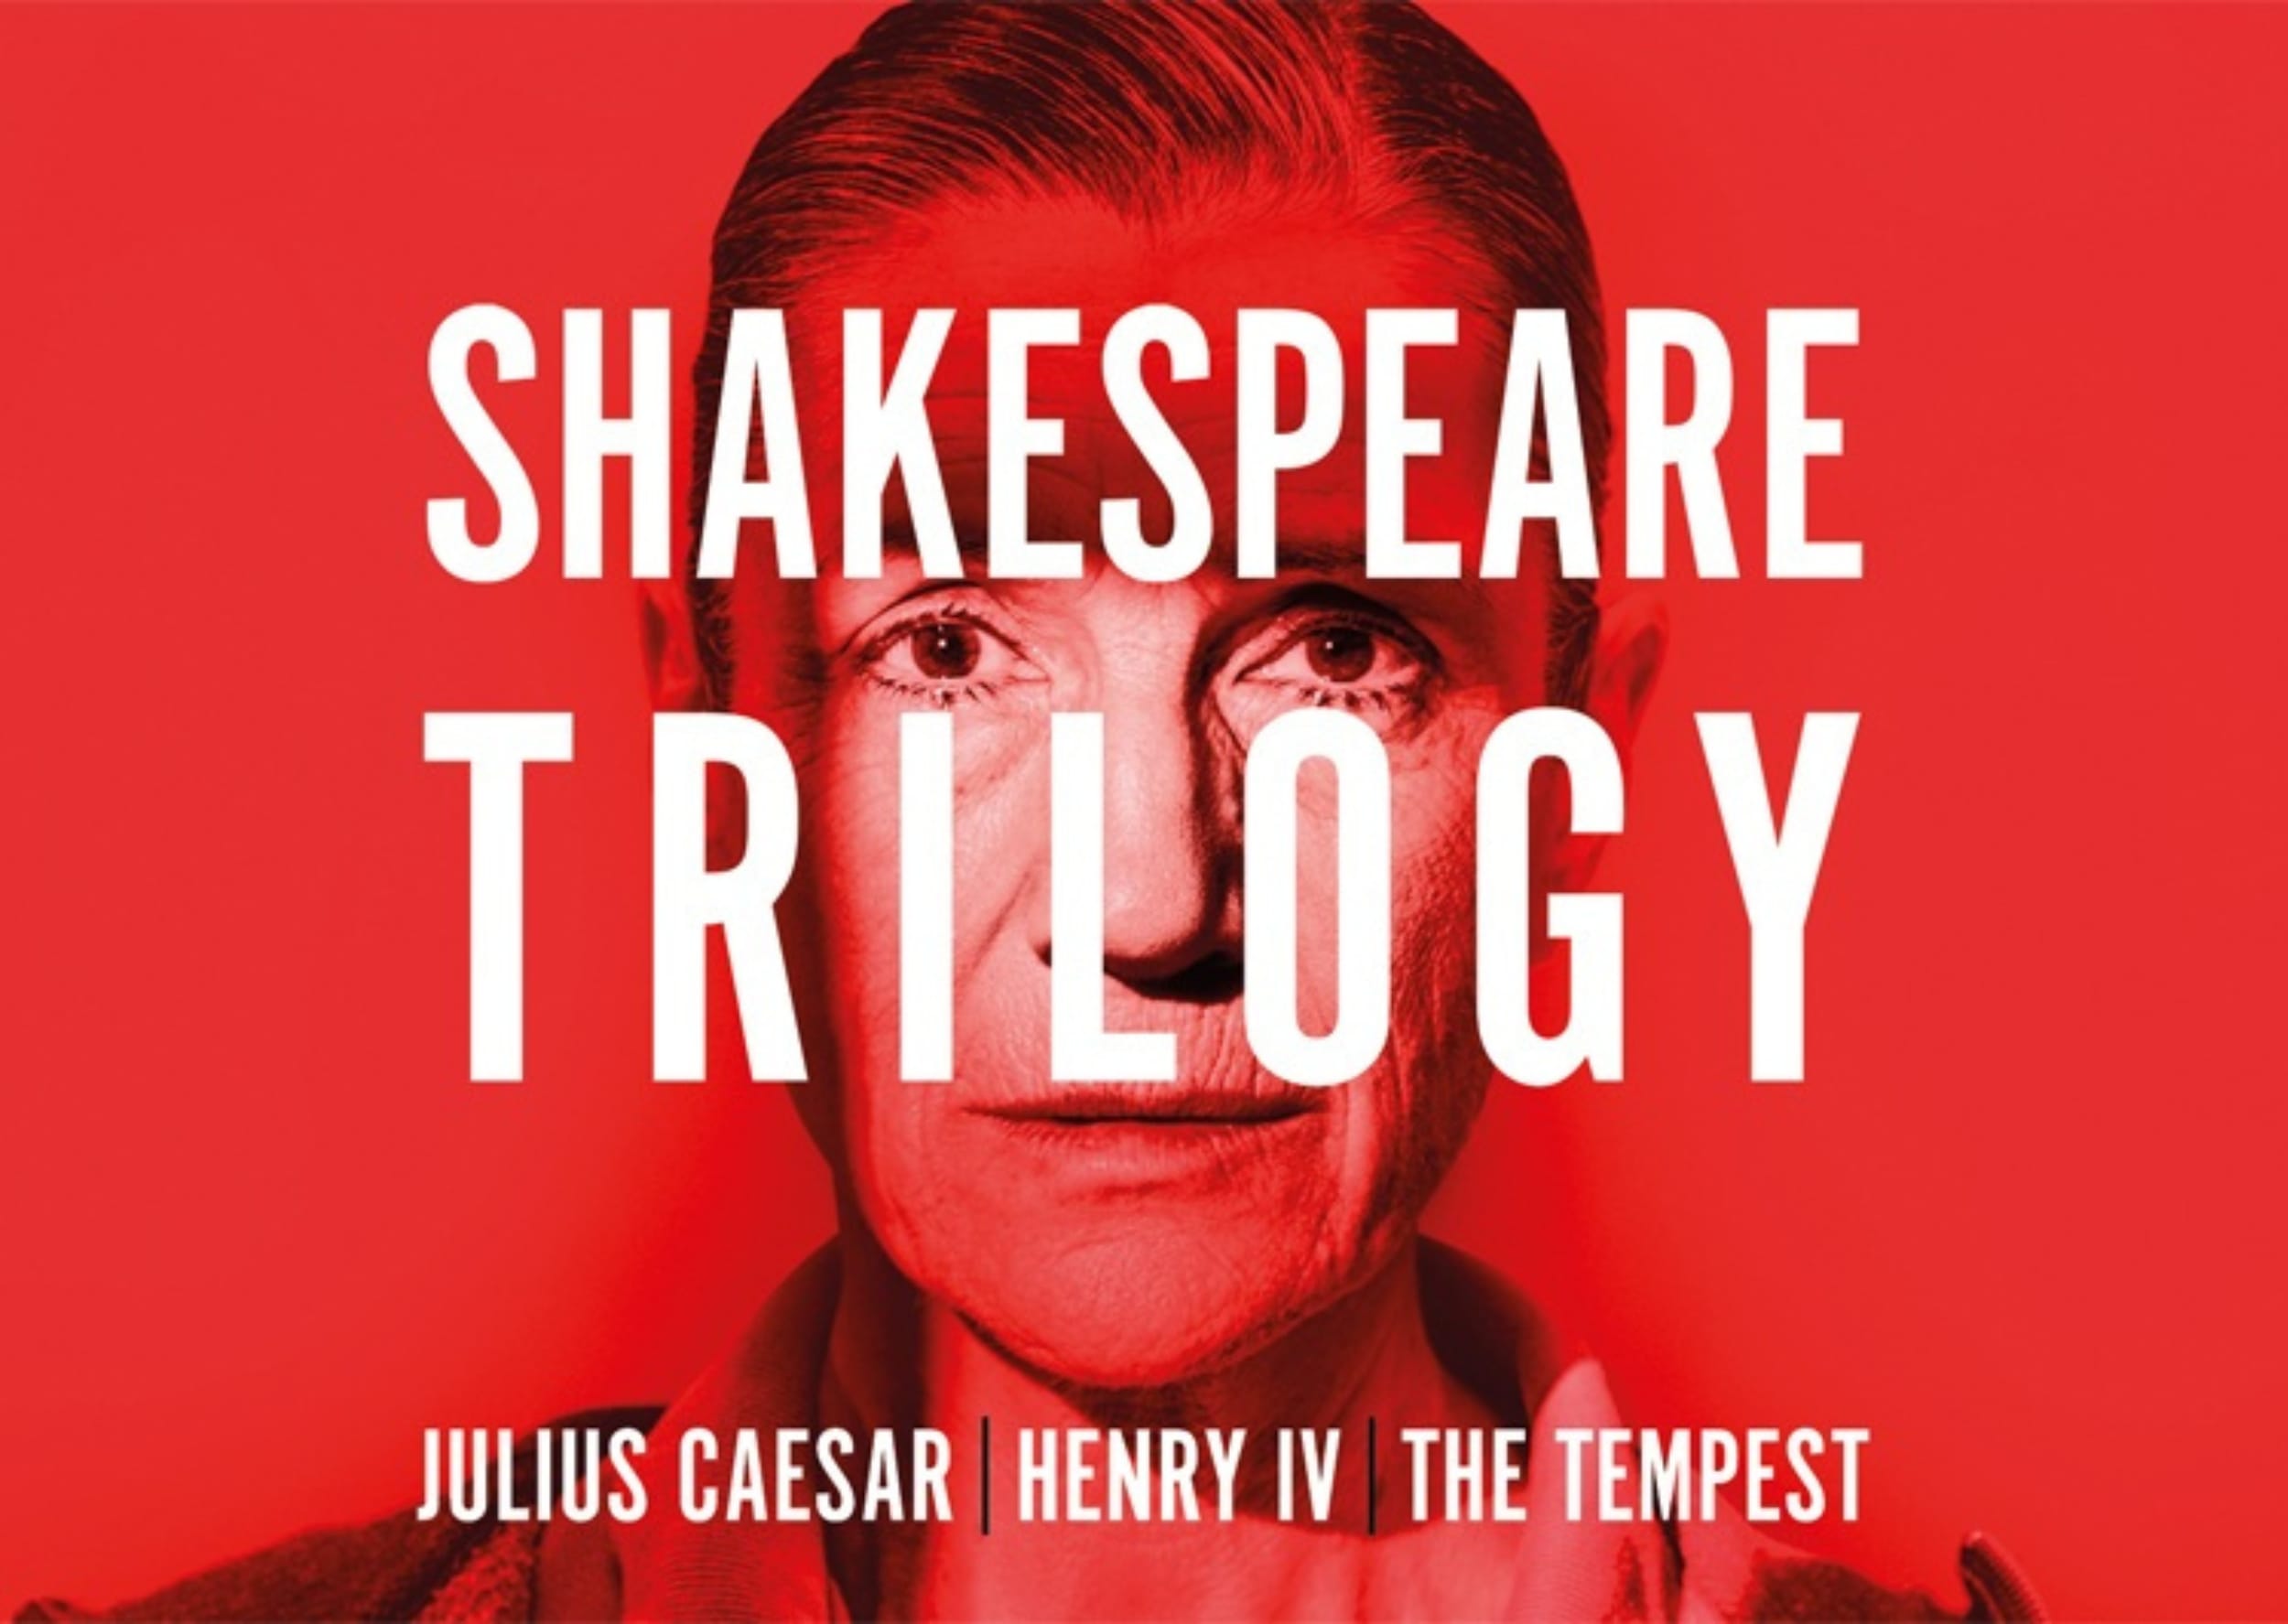 Donmar Shakespeare Trilogy